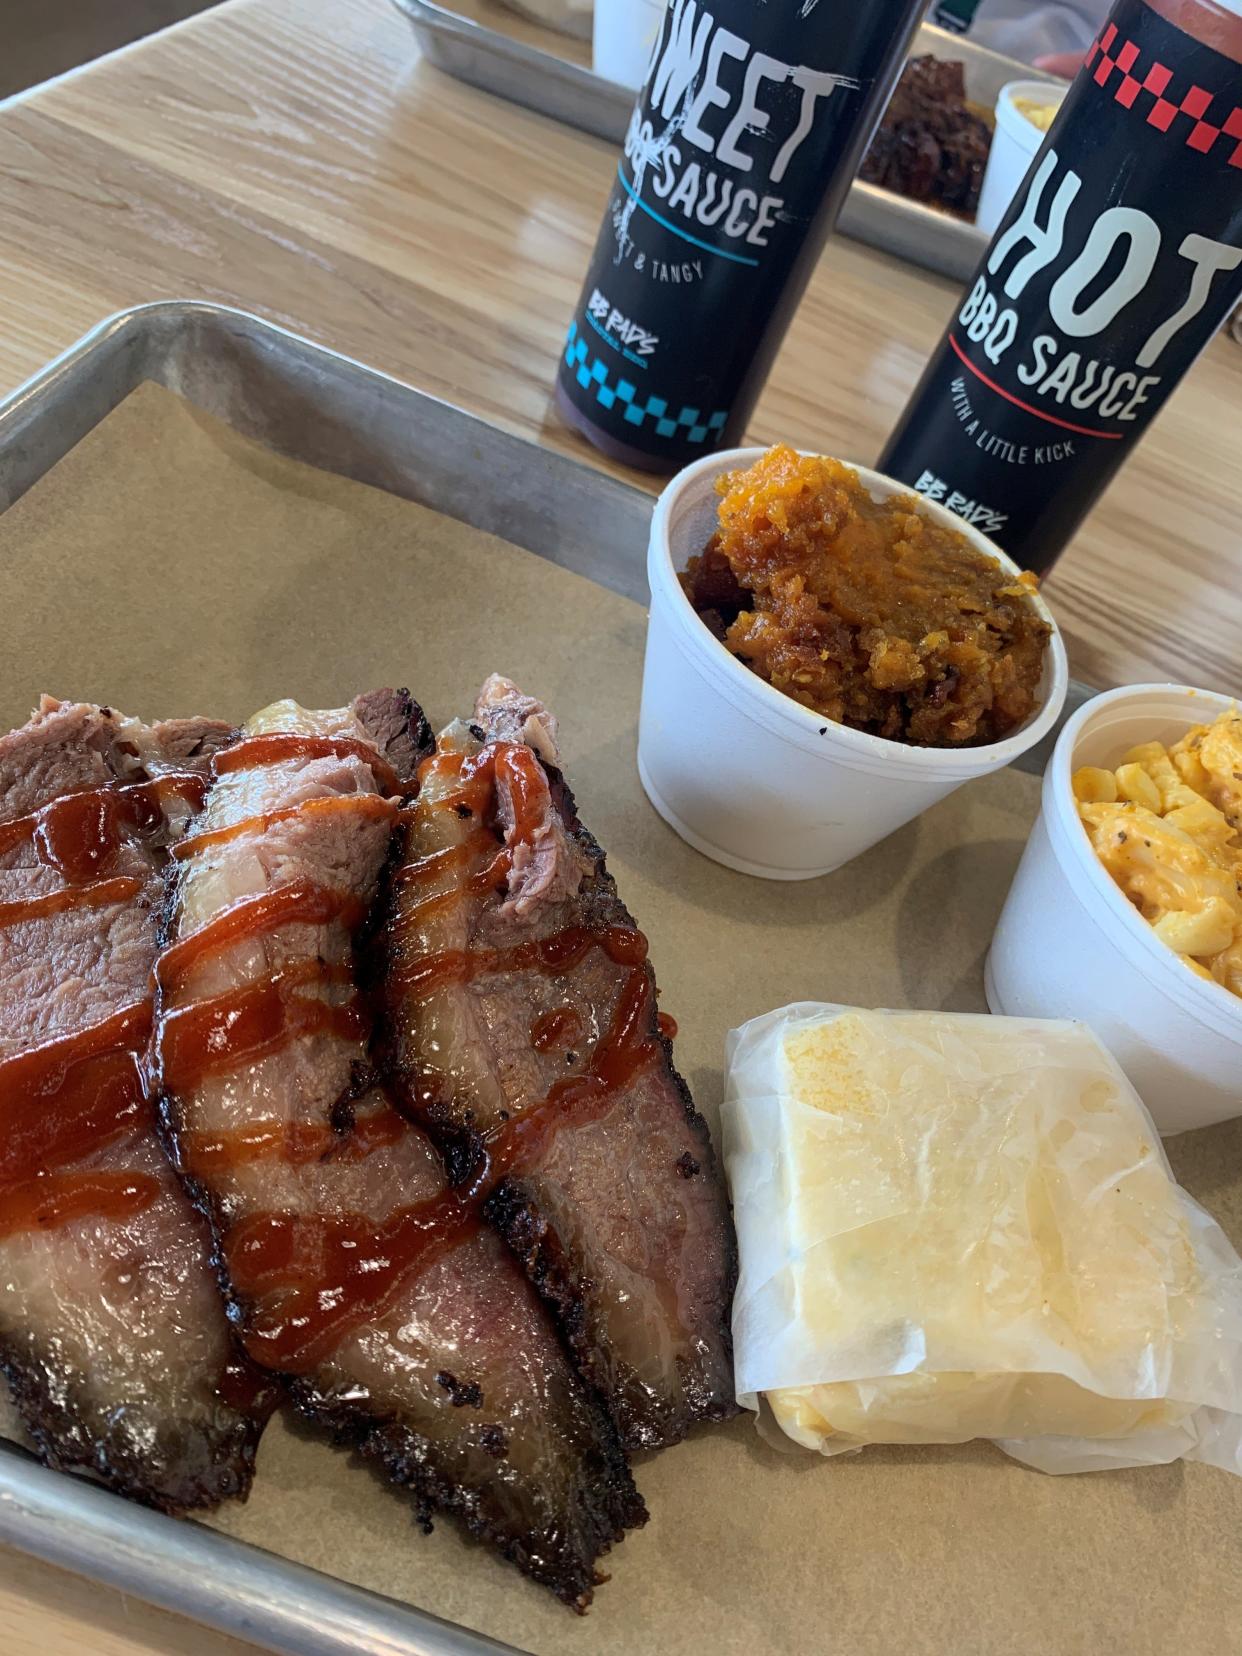 A brisket platter at BB Rad's Coastal BBQ in Titusville includes cornbread and two sides, in this case, sweet potato casserole and and mac and cheese.